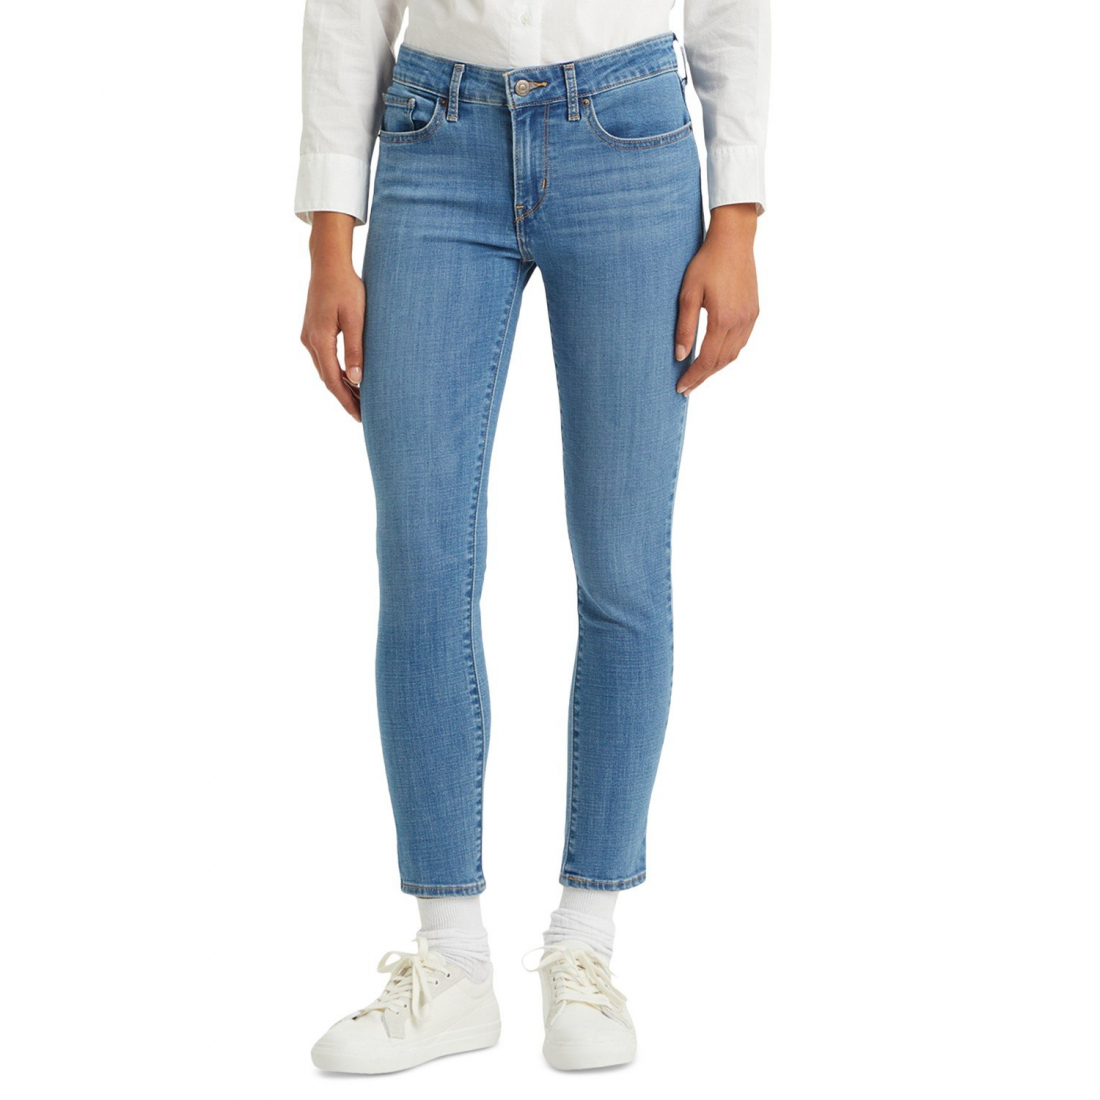 Women's '711 Mid Rise Stretch' Skinny Jeans